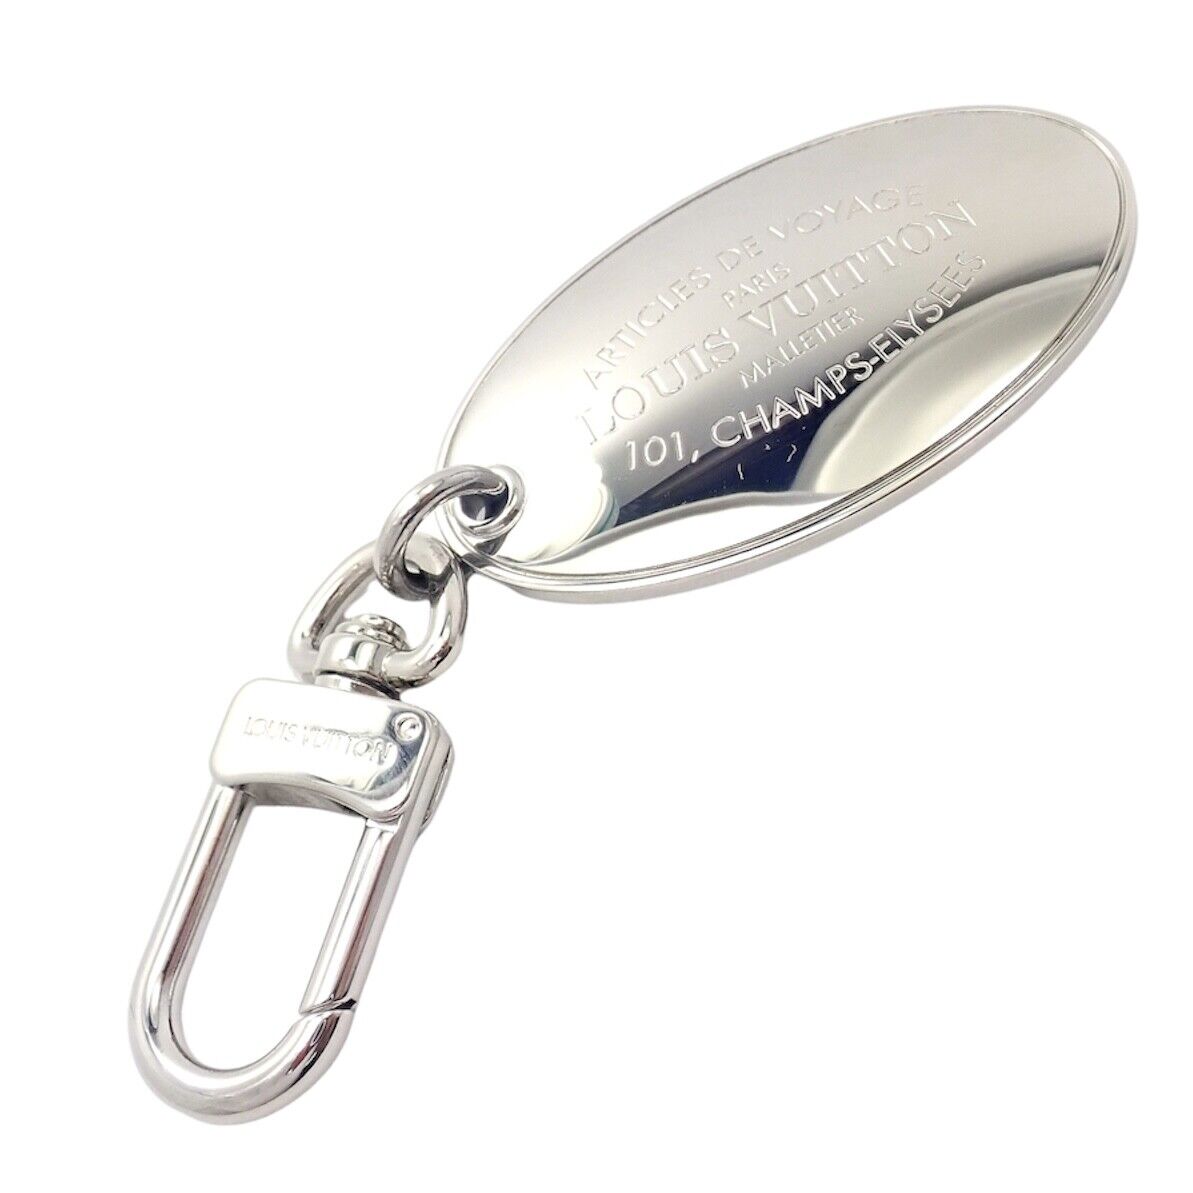 Louis Vuitton LV Large Stainless Steel Luggage Tag Key Chain